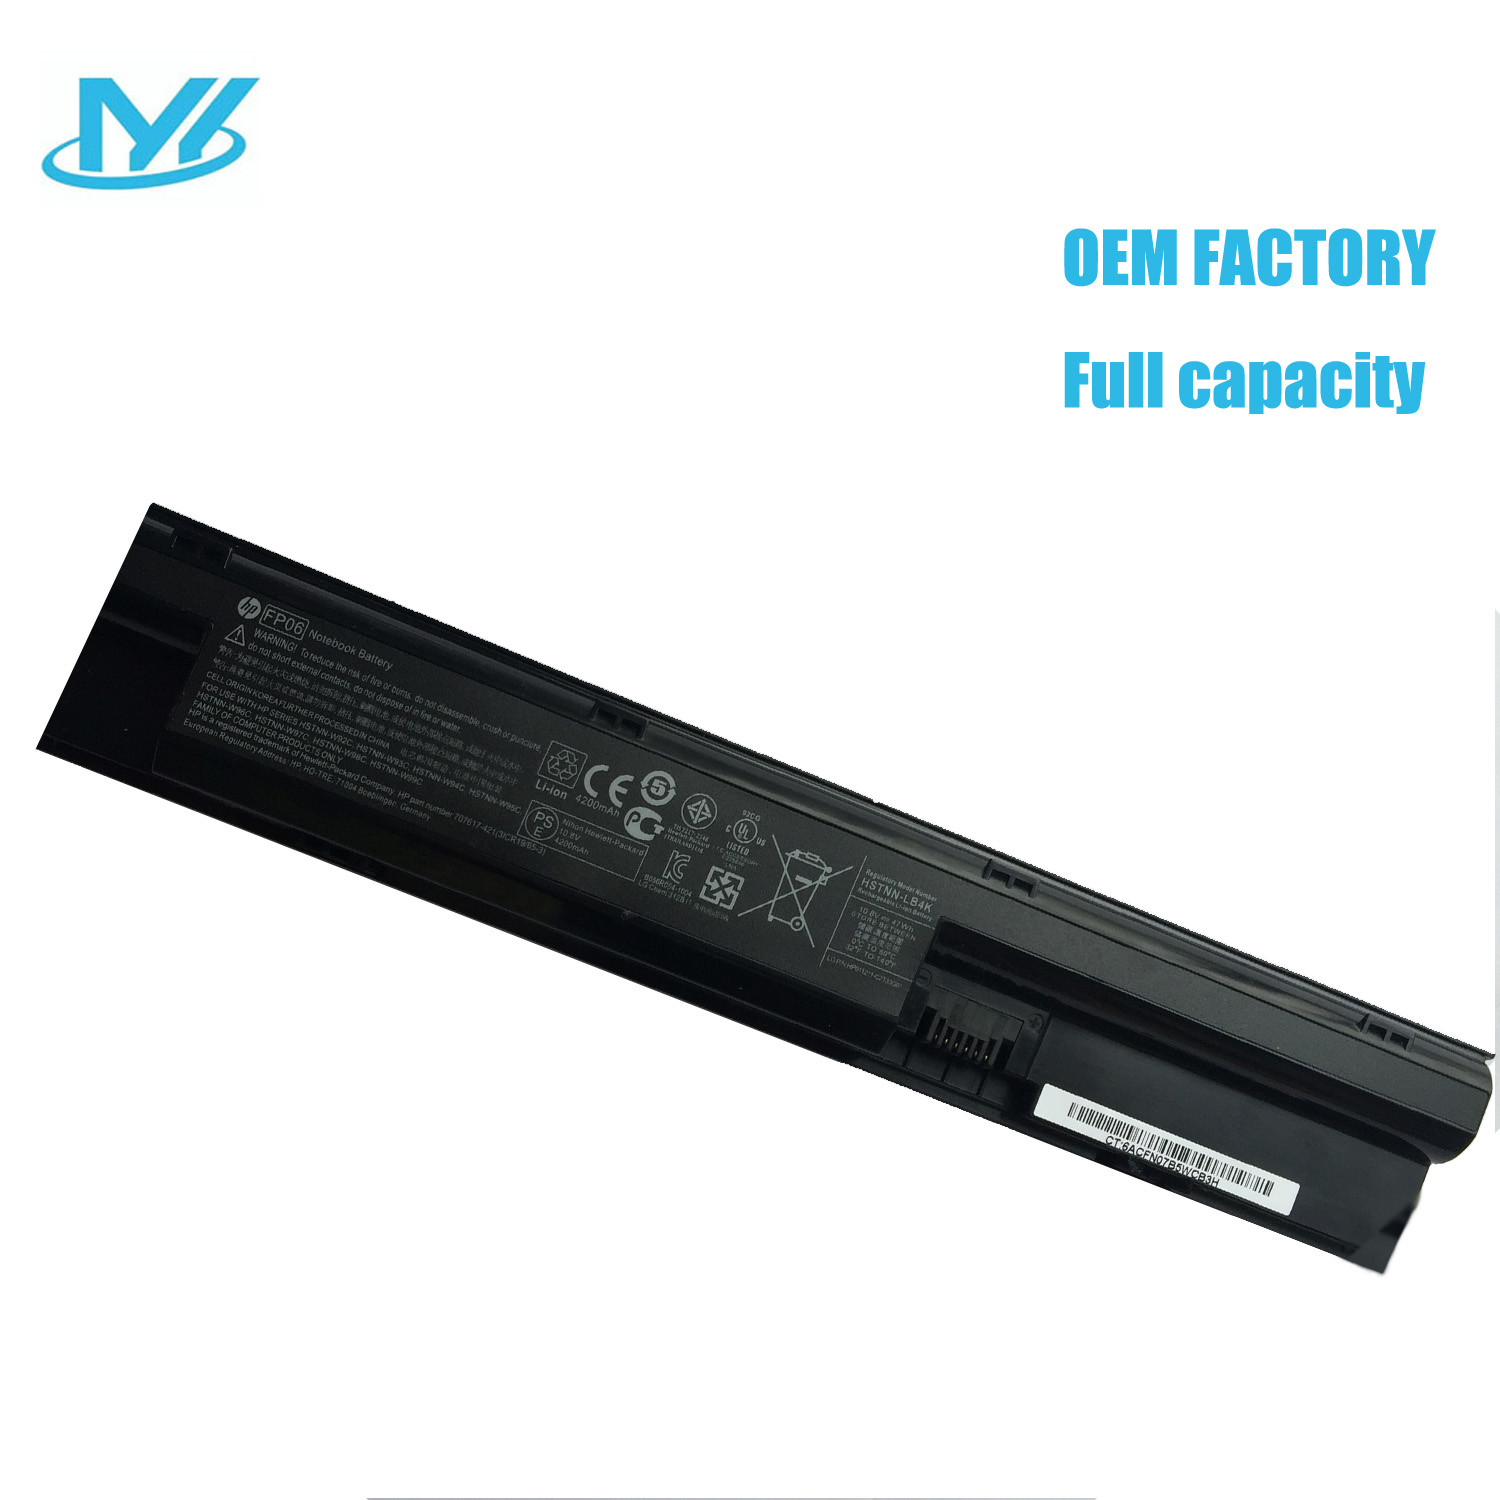 FP06 rechargeable lithium ion Notebook battery Laptop battery 7.7V 4680mAh for HP laptop ProBook 440 445 450 455 470 G0 G1 708458-001 708457-001